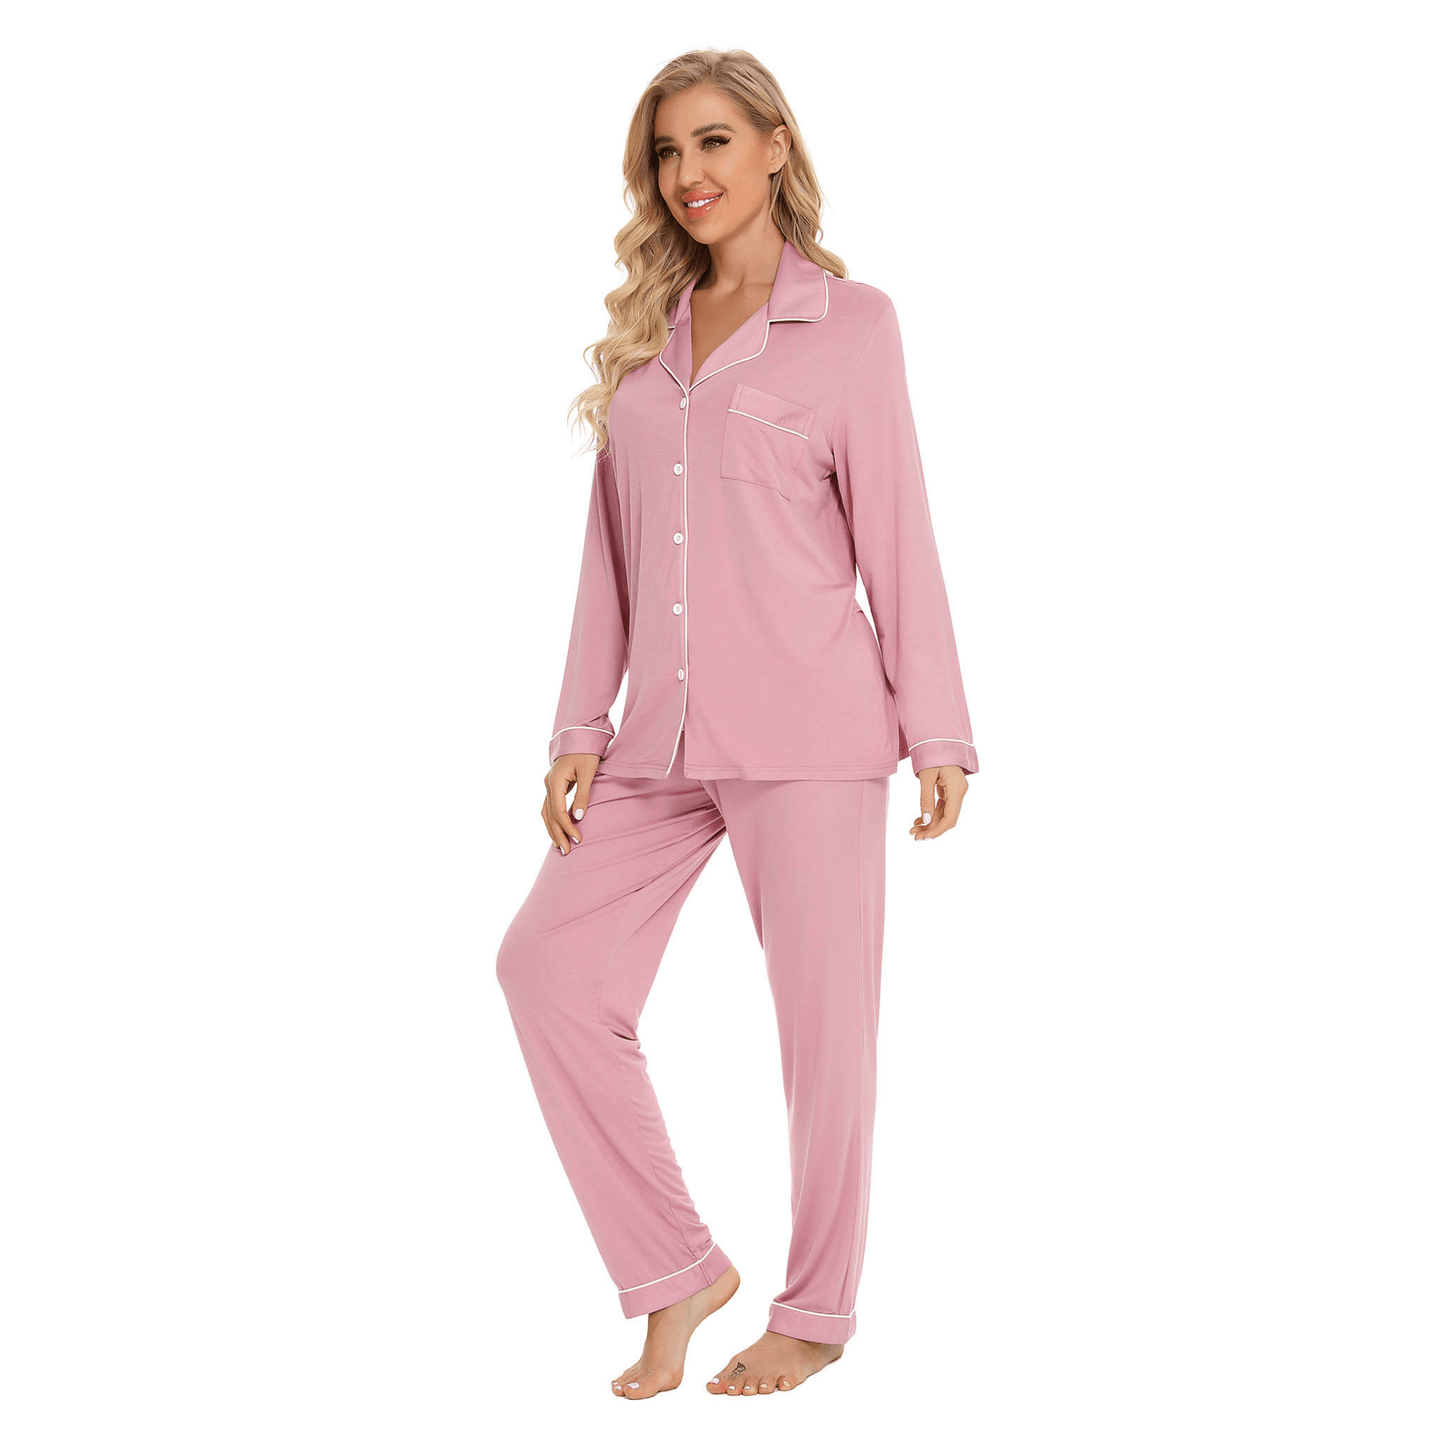 Long bamboo dusky pink pyjama sets with contrast white piping